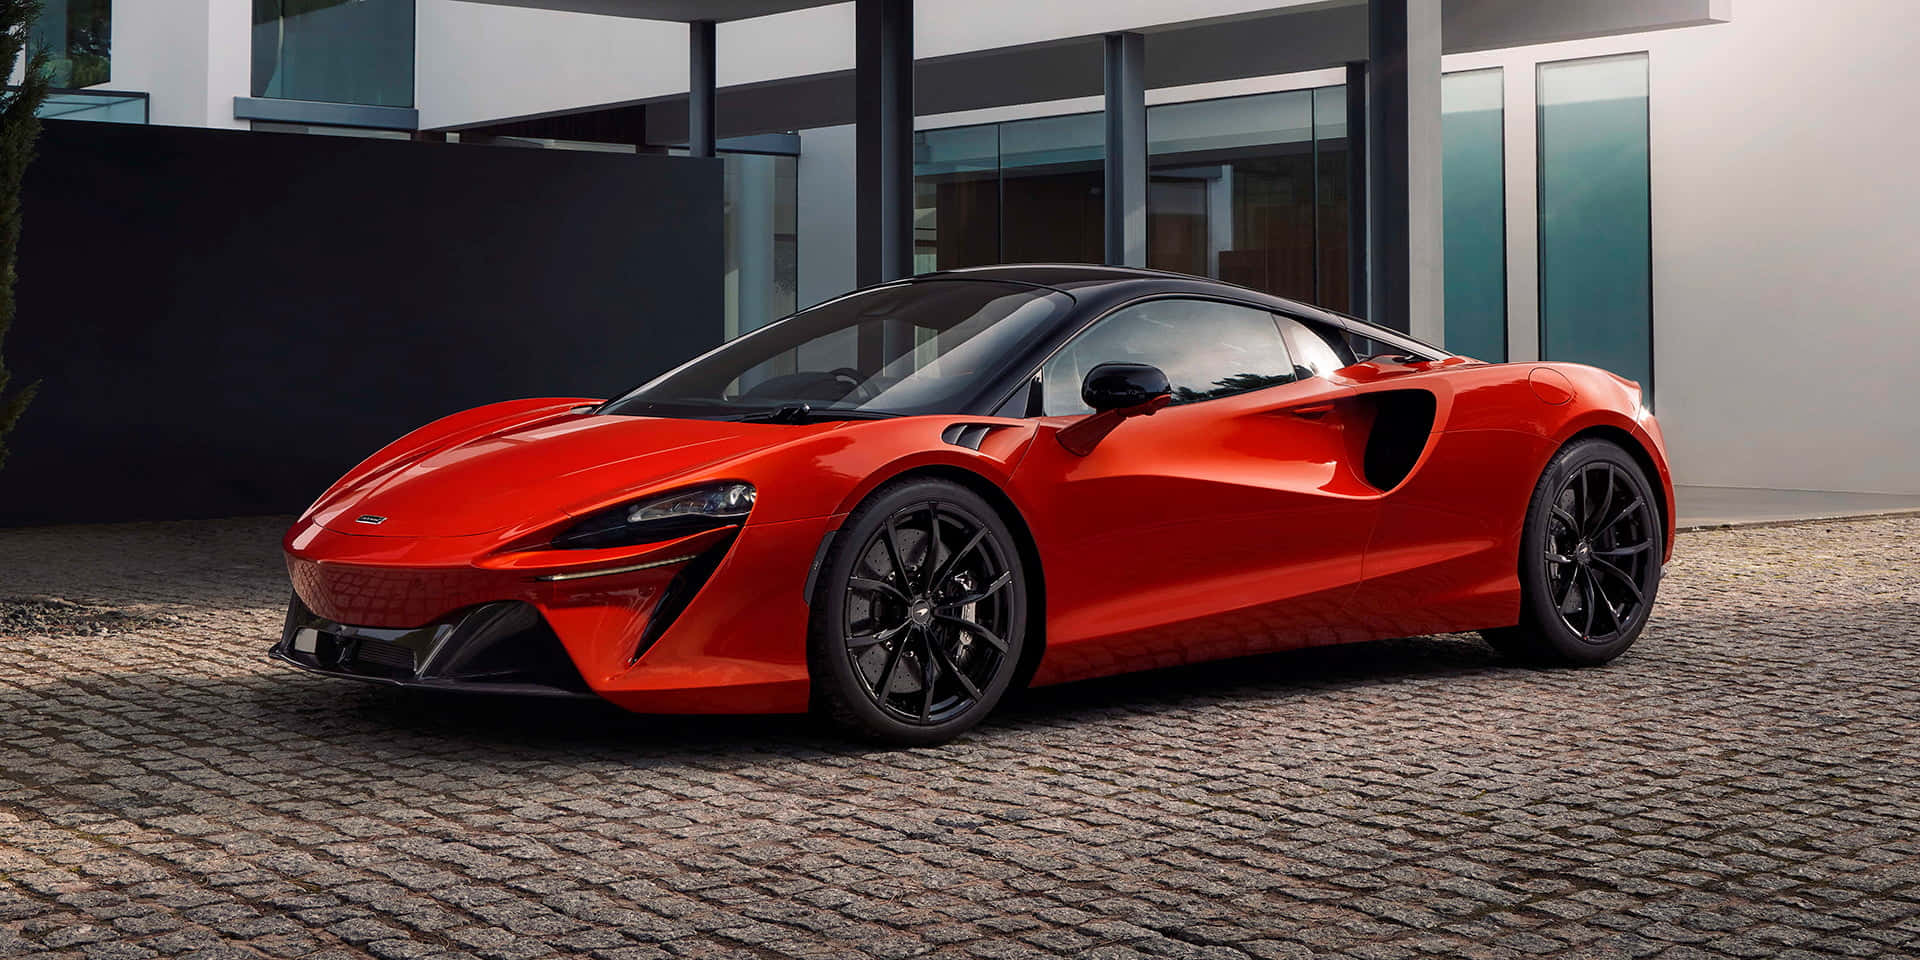 Get ready to drive in style with a McLaren